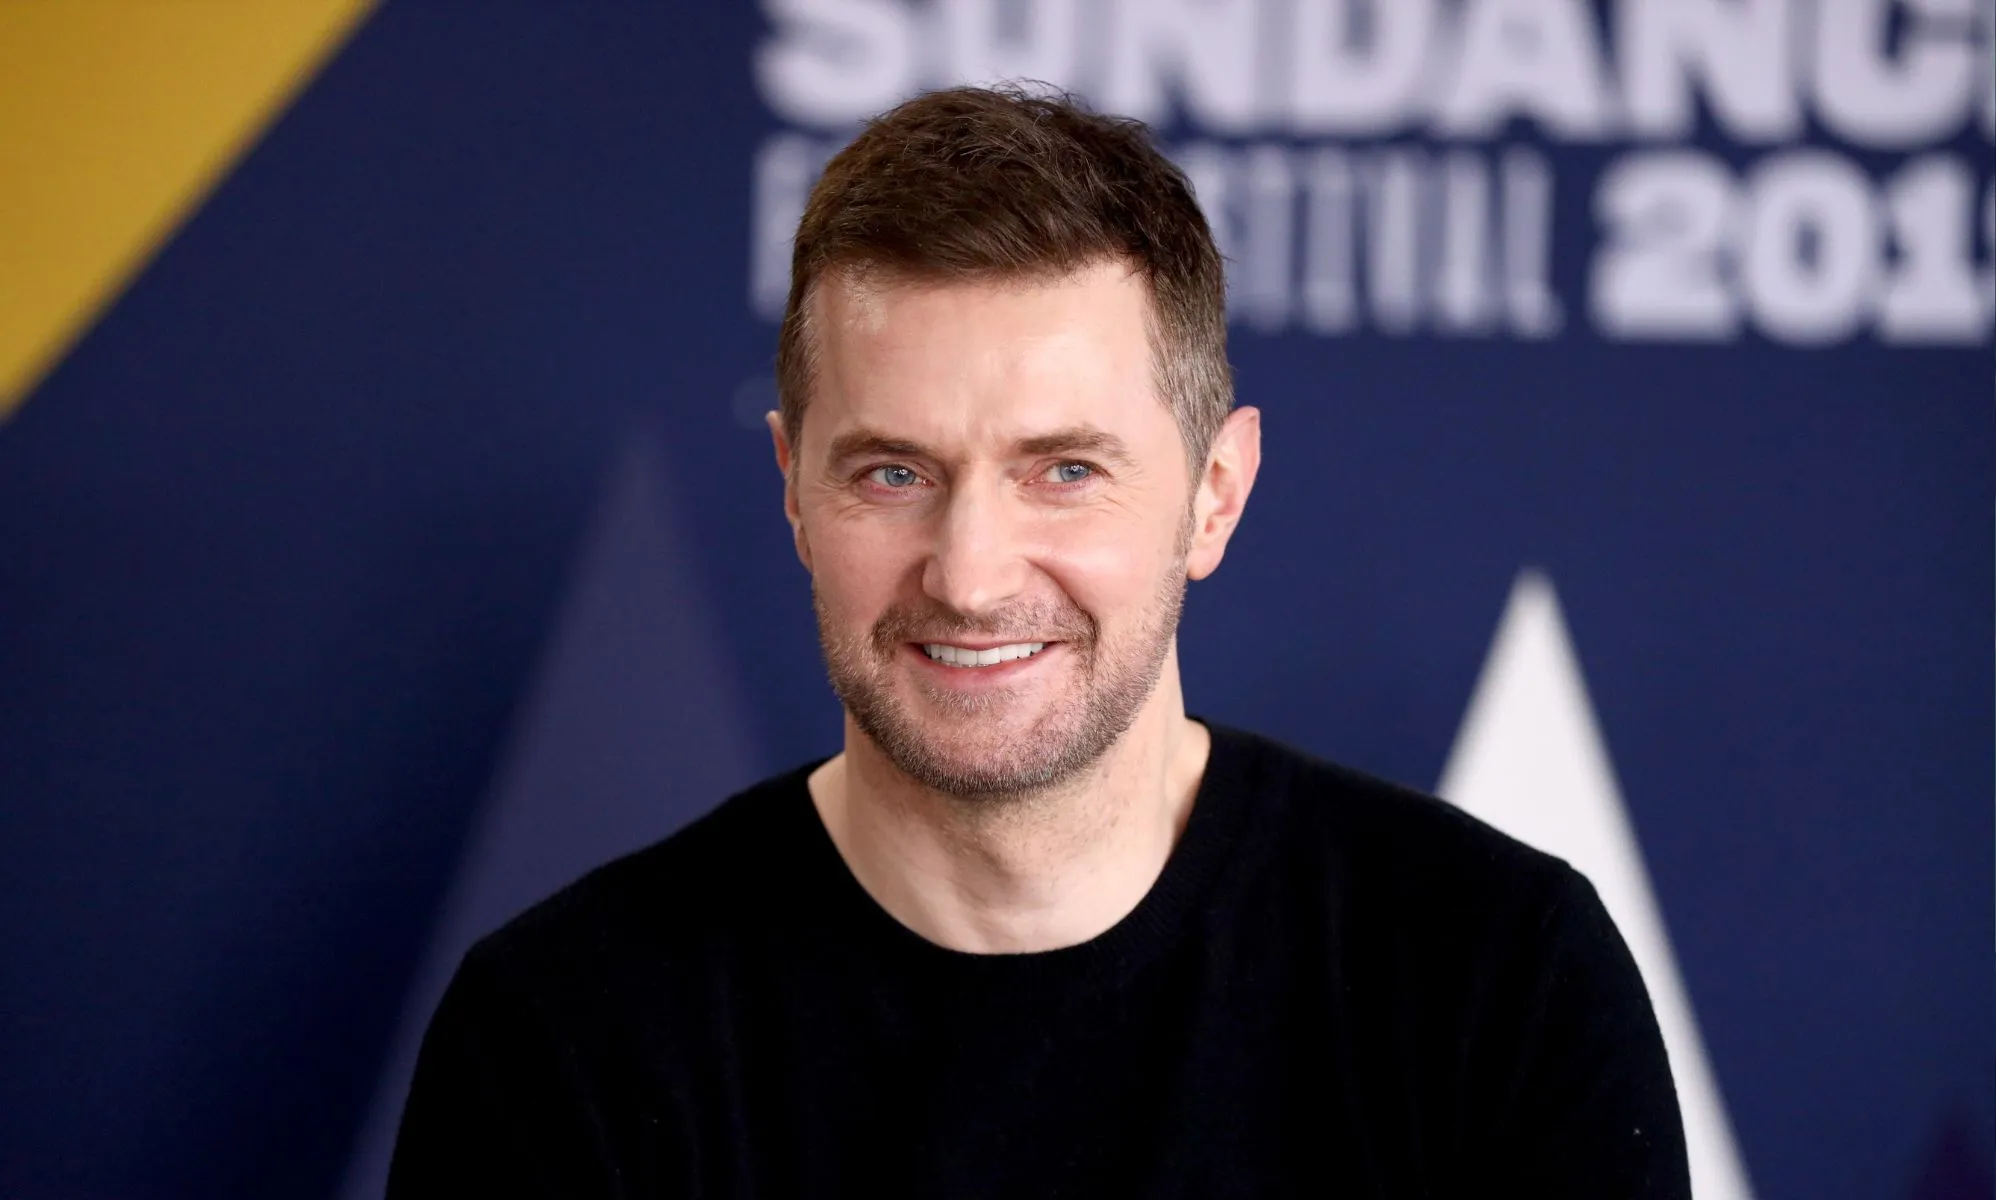 LGBTQ+ actor Richard Armitage’s best roles to date, from Spooks to ITV’s Red Eye